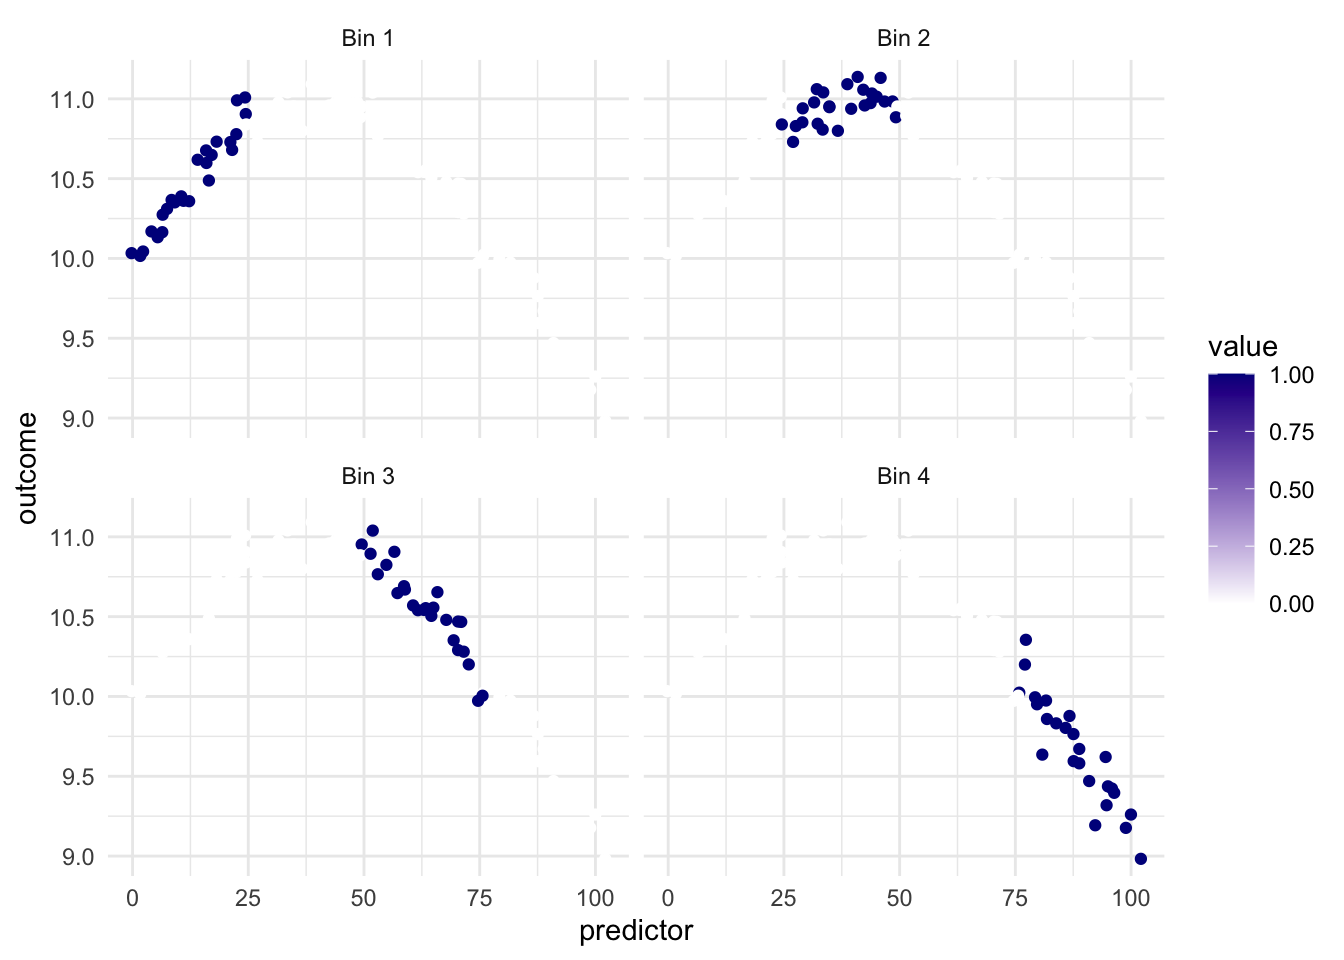 Facetted scatter chart. Predictor along the x-axis, outcome along the y-axis. Each of the facets shows the same non-linear relationship between predictor and outcome. Color is used to show how each bin highlights a different part of the predictor. The highlight goes further to the right for each facet.